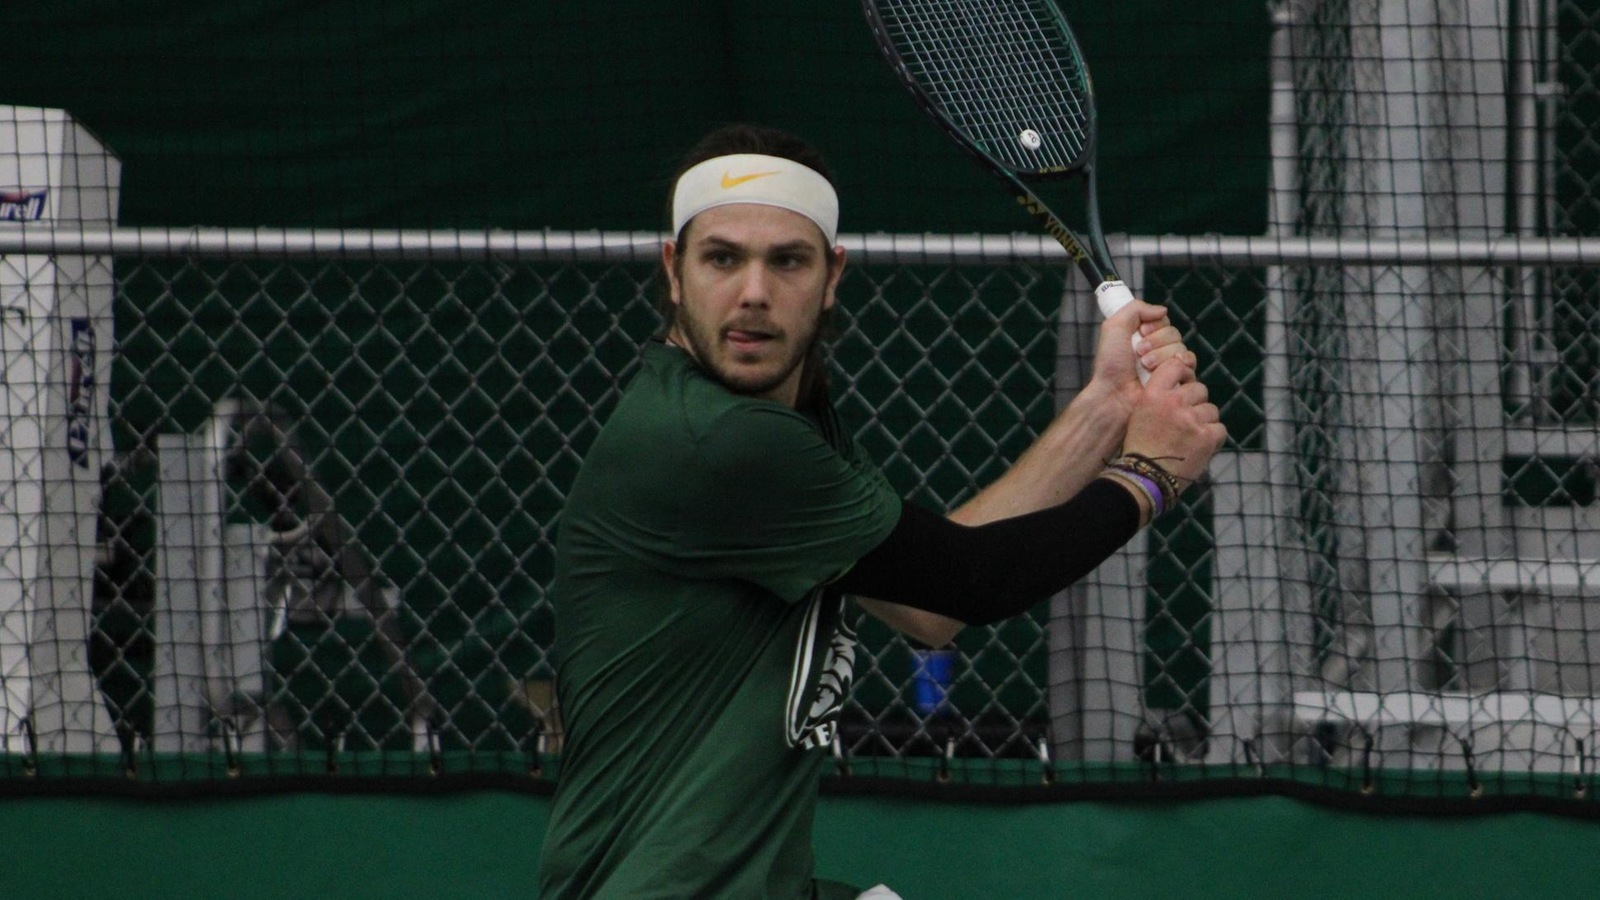 Cleveland State Men’s Tennis Continues Play At ITA Midwest Regional